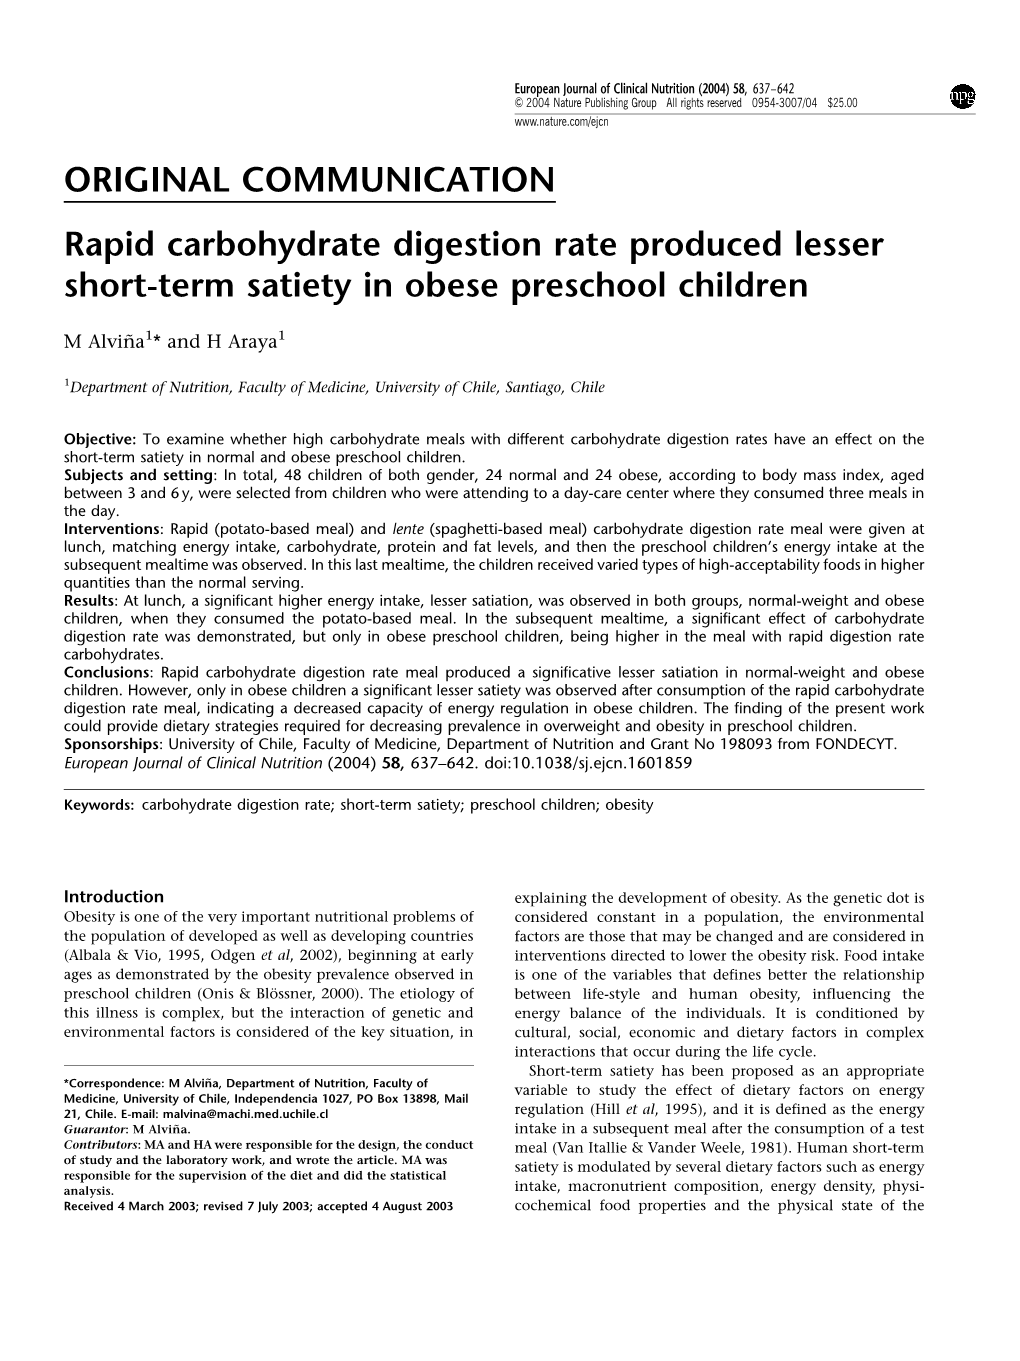 Rapid Carbohydrate Digestion Rate Produced Lesser Short-Term Satiety in Obese Preschool Children